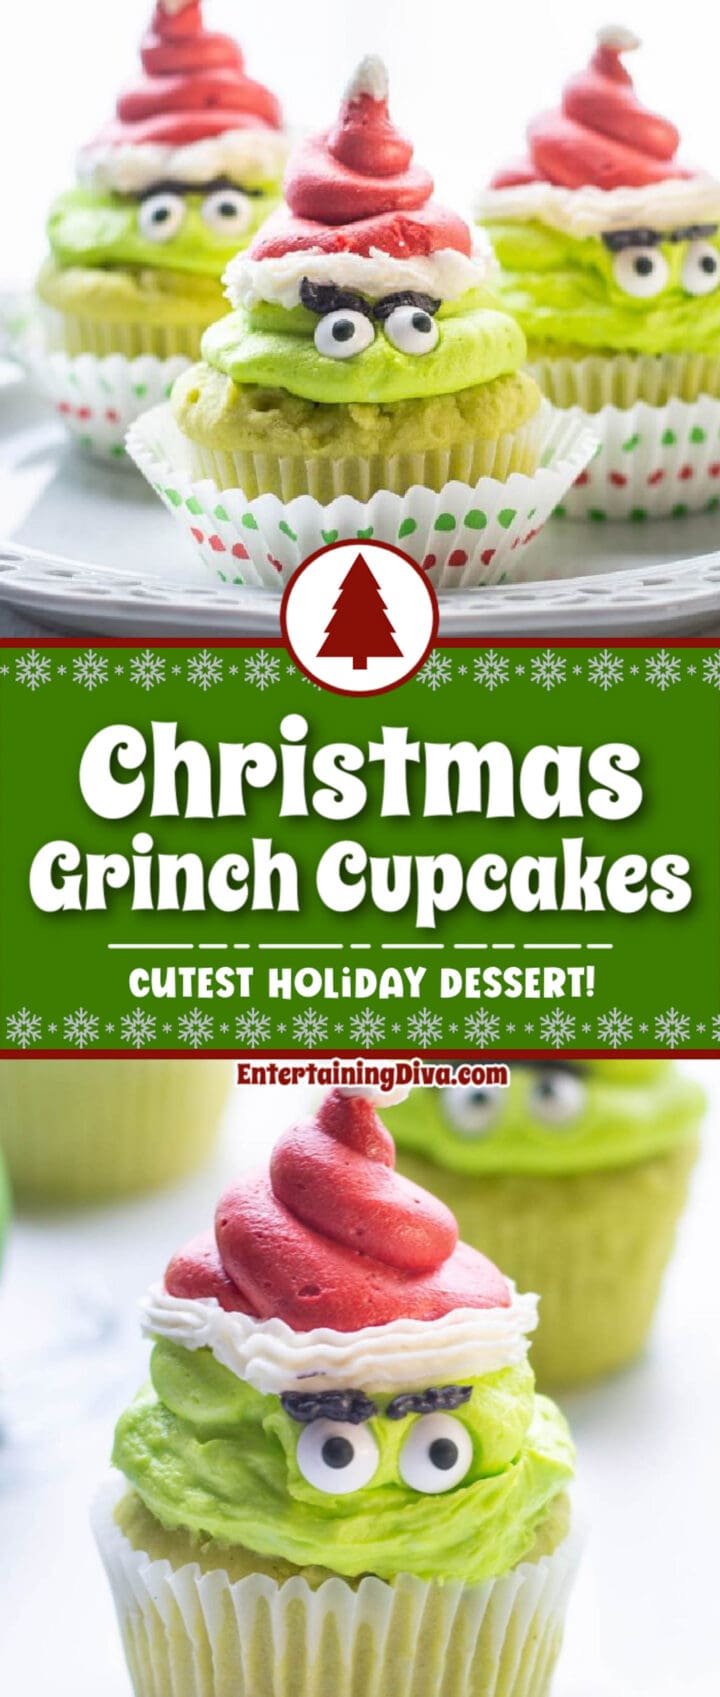 Grinch cupcakes with a sweet holiday twist.